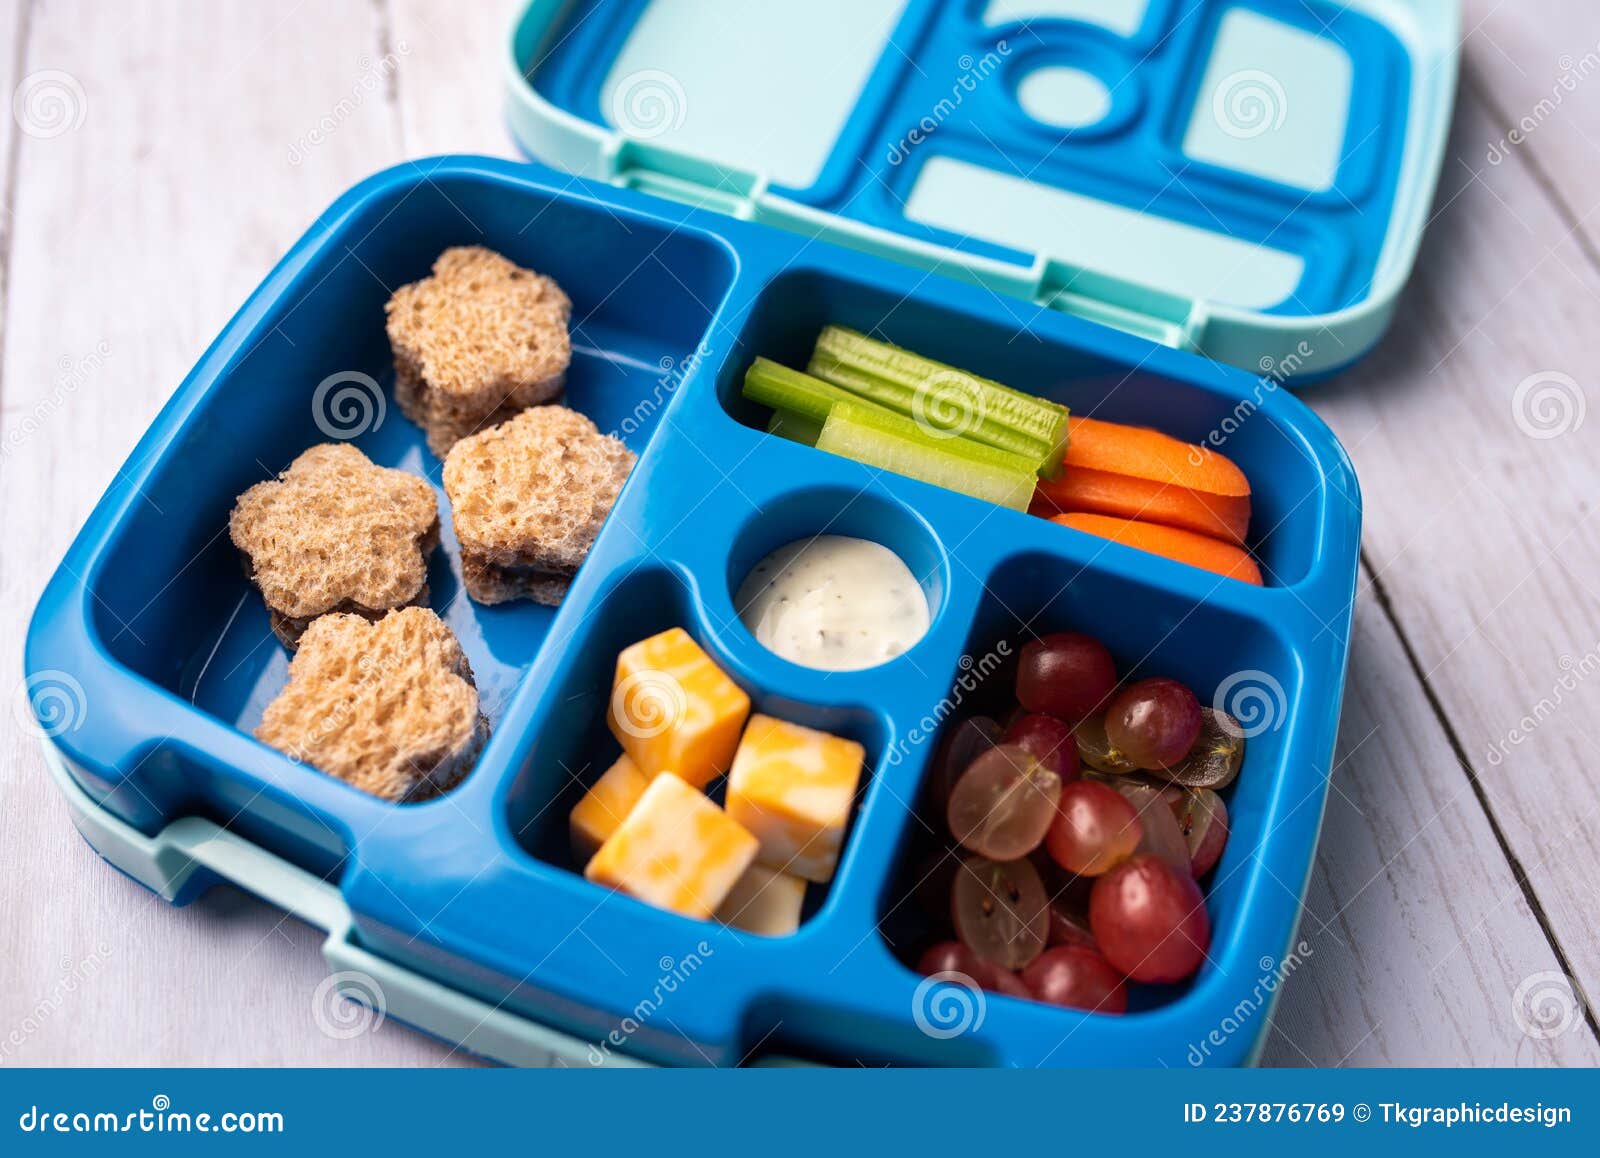 https://thumbs.dreamstime.com/z/kid-school-lunch-blue-bento-box-set-healthy-food-options-toddler-young-kids-finger-ideas-daycare-237876769.jpg